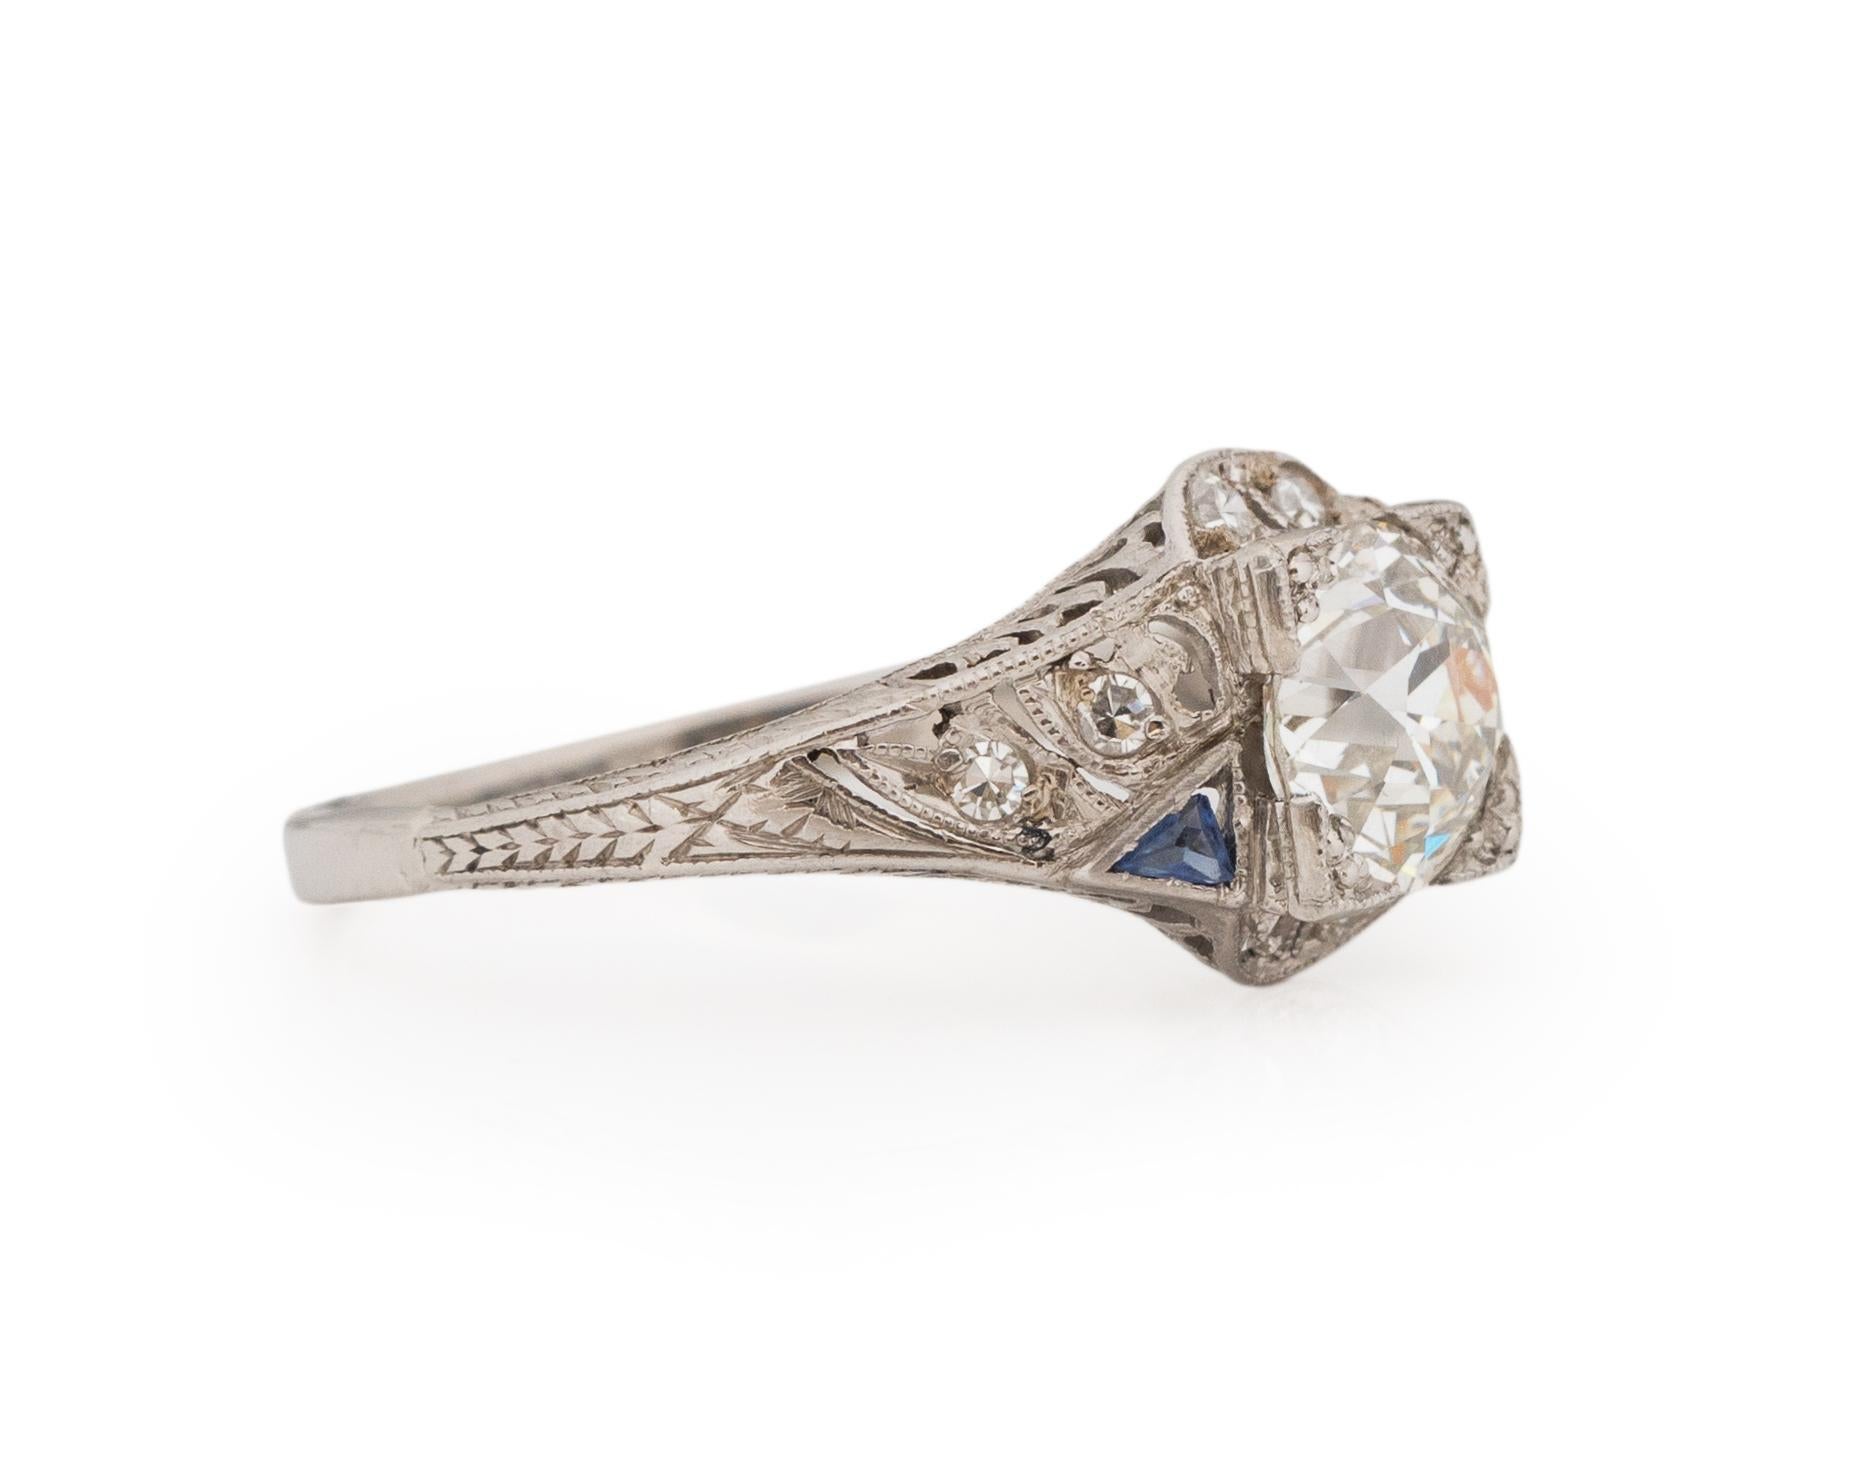 Ring Size: 7.25
Metal Type: Platinum [Hallmarked, and Tested]
Weight: 3.0 grams

Center Diamond Details:
GIA REPORT #: 2223203932
Weight: 1.48ct
Cut: Old European brilliant
Color: I
Clarity: VS2
Measurements: 7.11mm x 6.92mm x 4.80mm

Side Stone